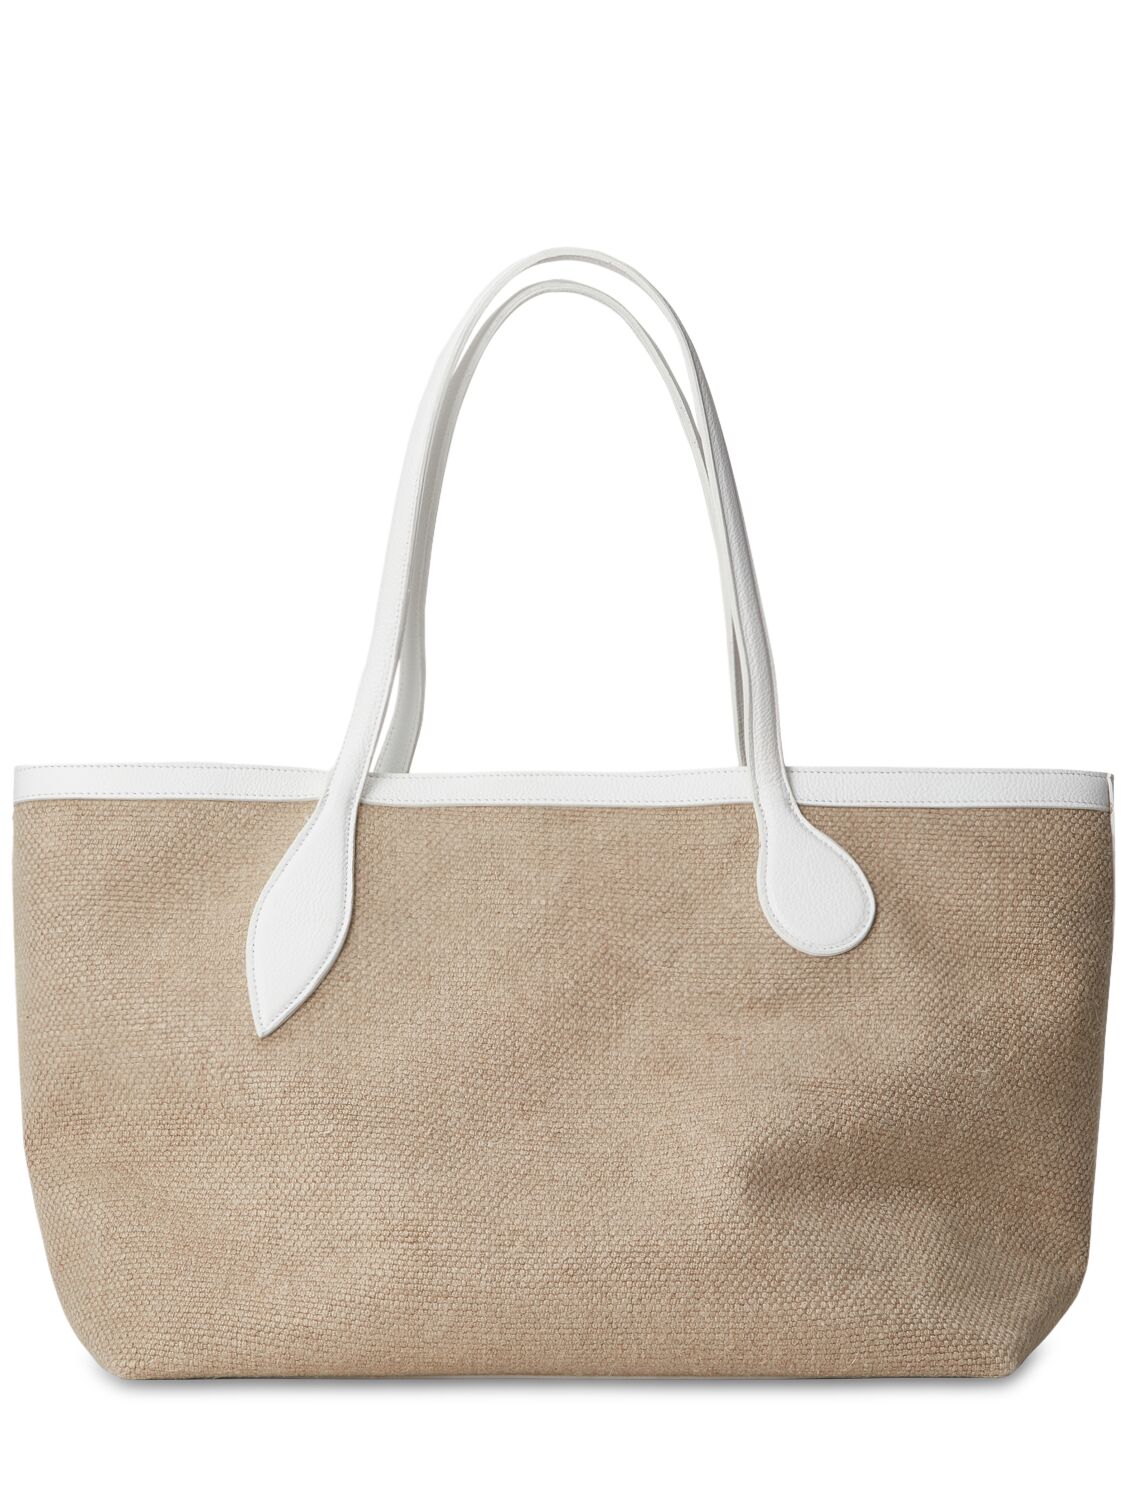 Image of Mega Sprout Linen Tote Bag